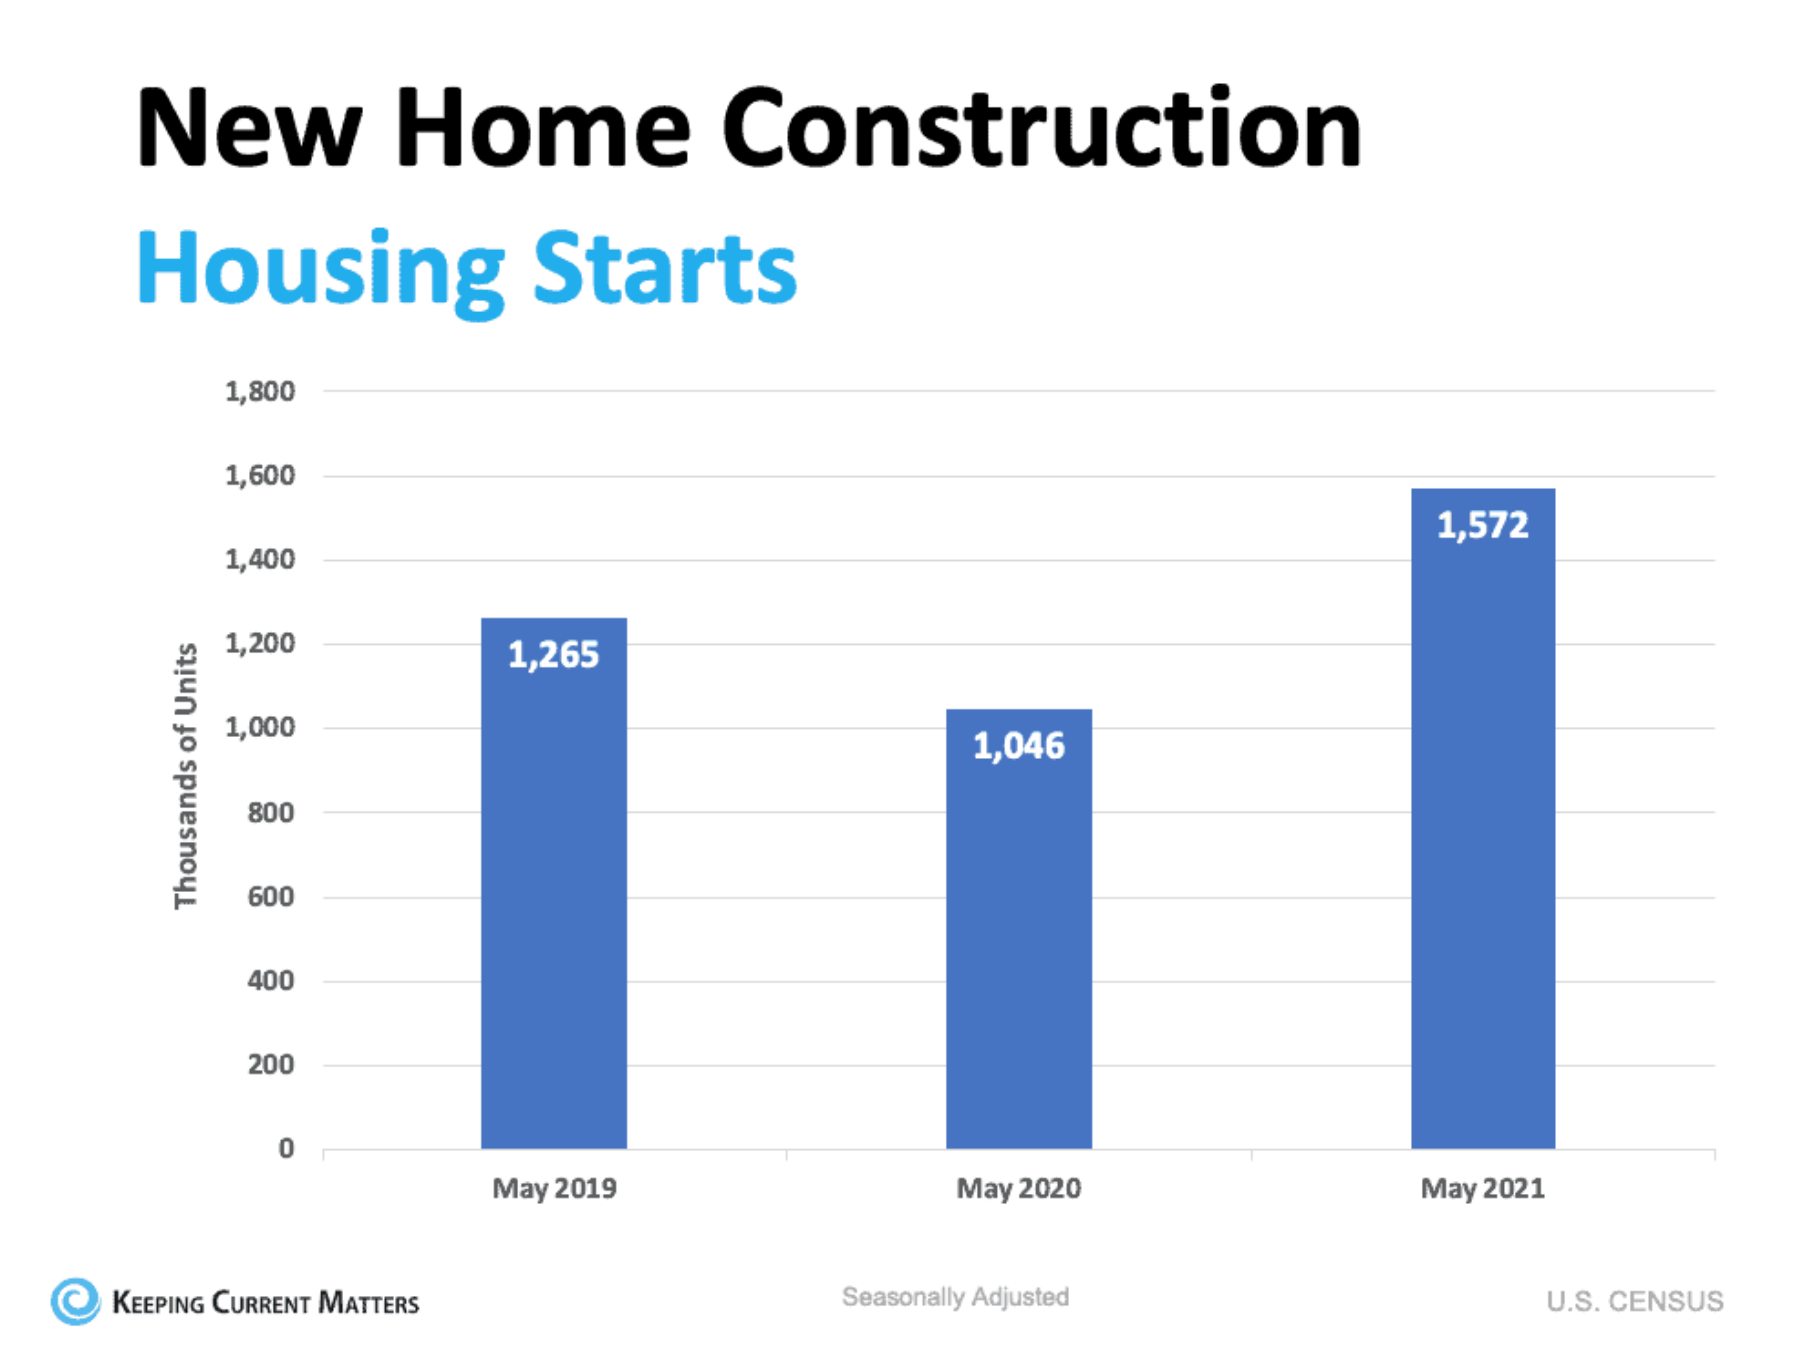 New Home Construction Housing Starts 2021